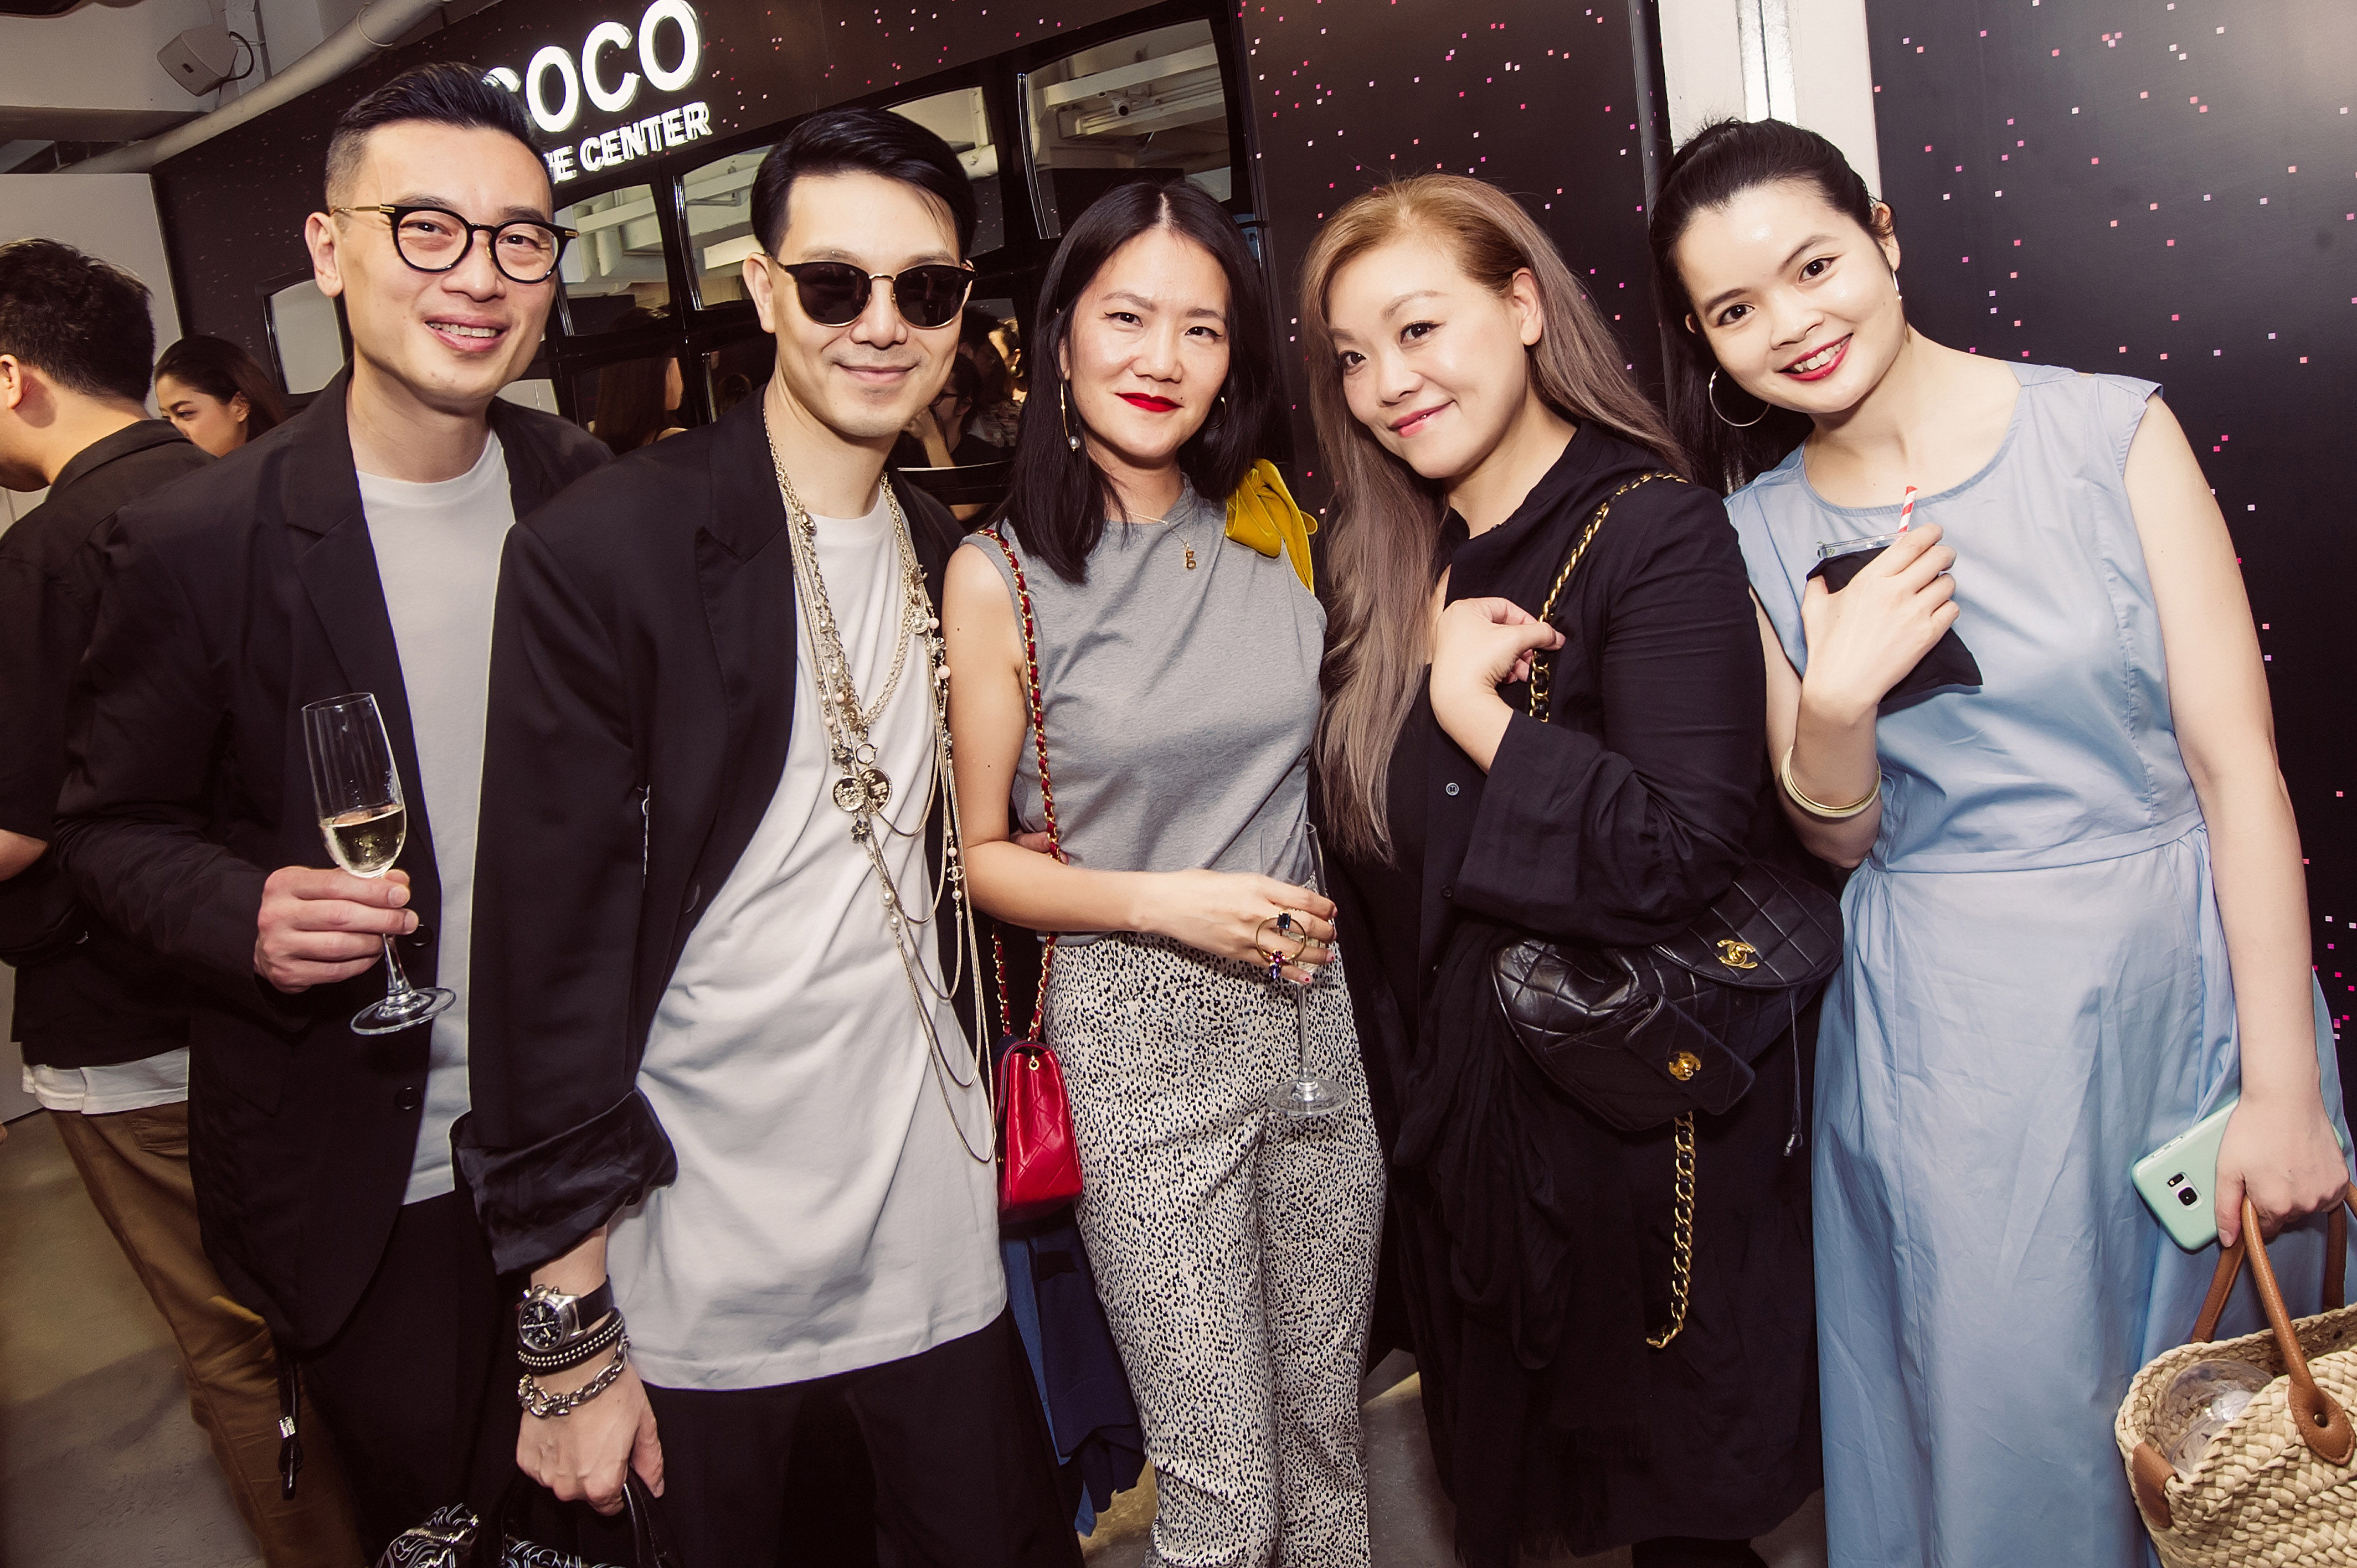 Chanel's Coco Game Center beauty pop-up launch party